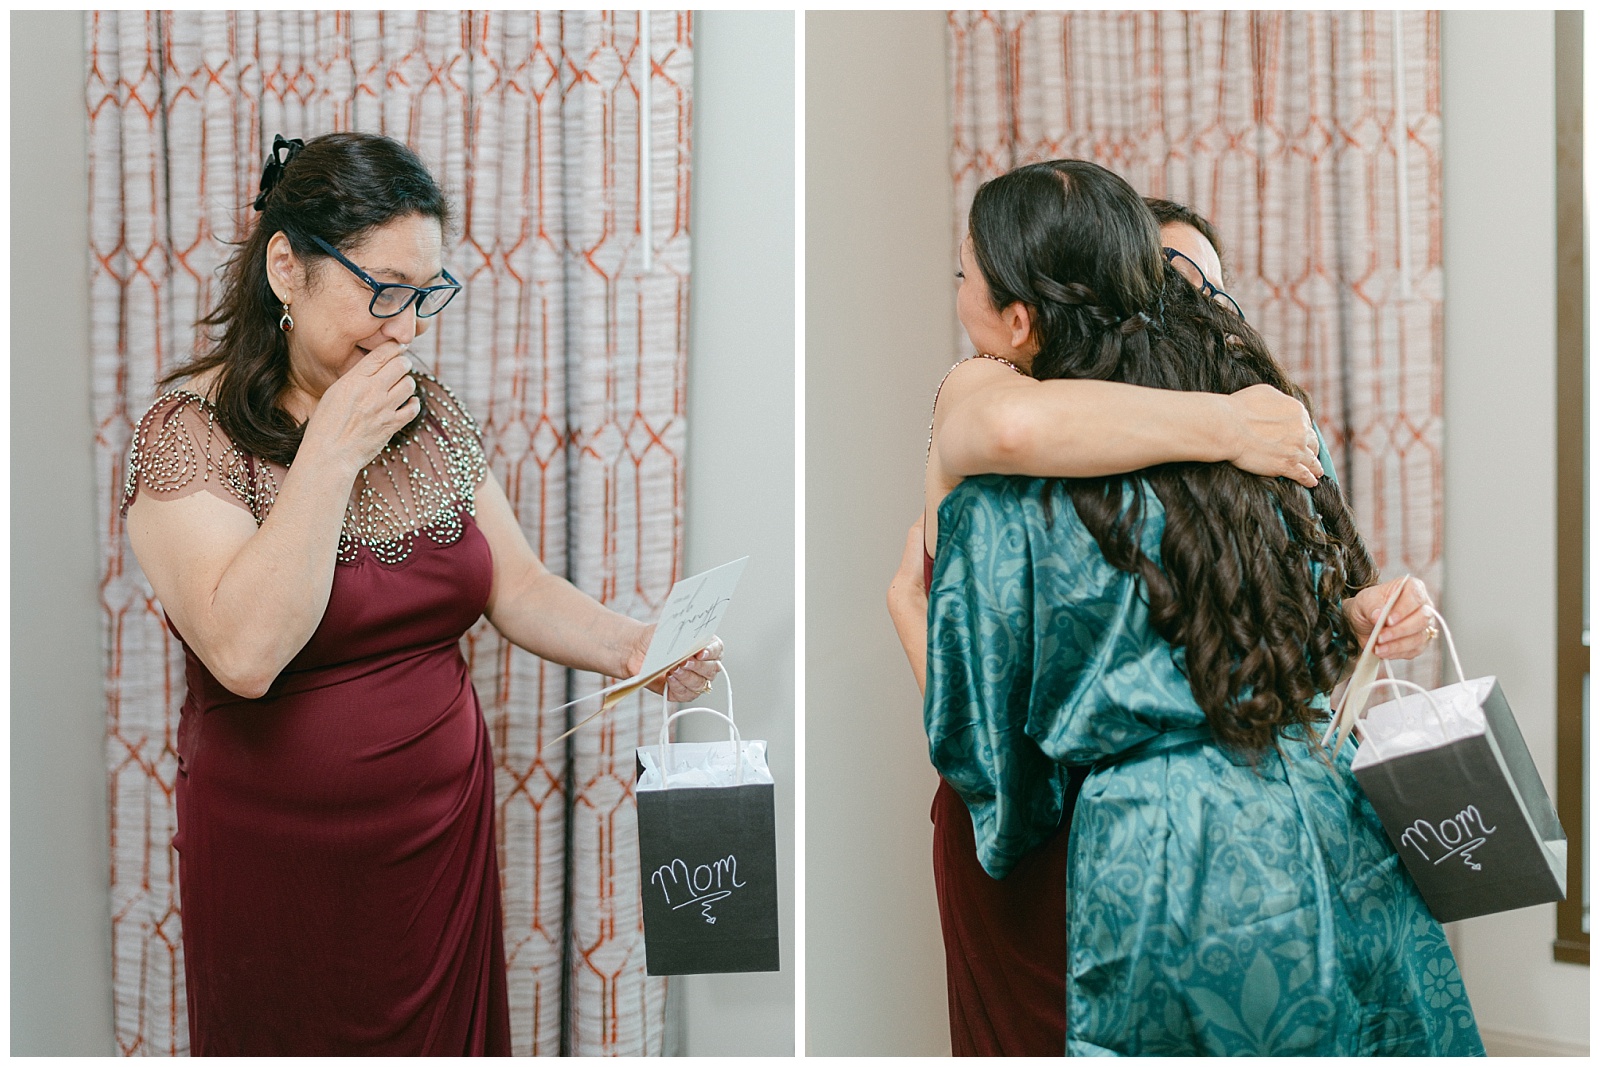 Left: Emotion getting ready photo of the mother of the bride.
Right: Mother of the bride and bride embrace each other.
By Elizabeth Kane Photography at Disney's Riviera Resort in Orlando Florida